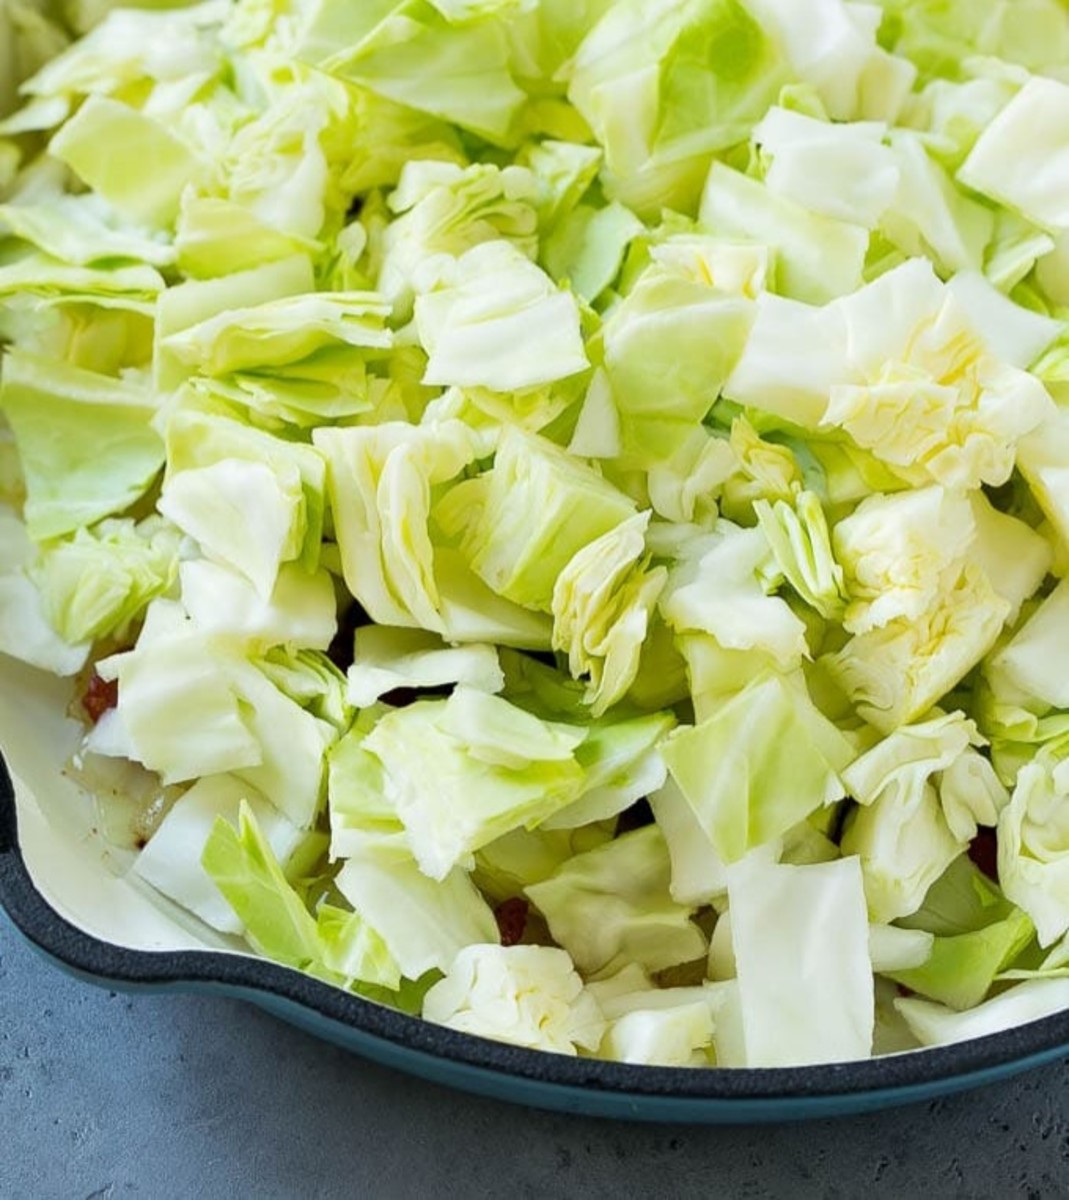 Chopped cabbage